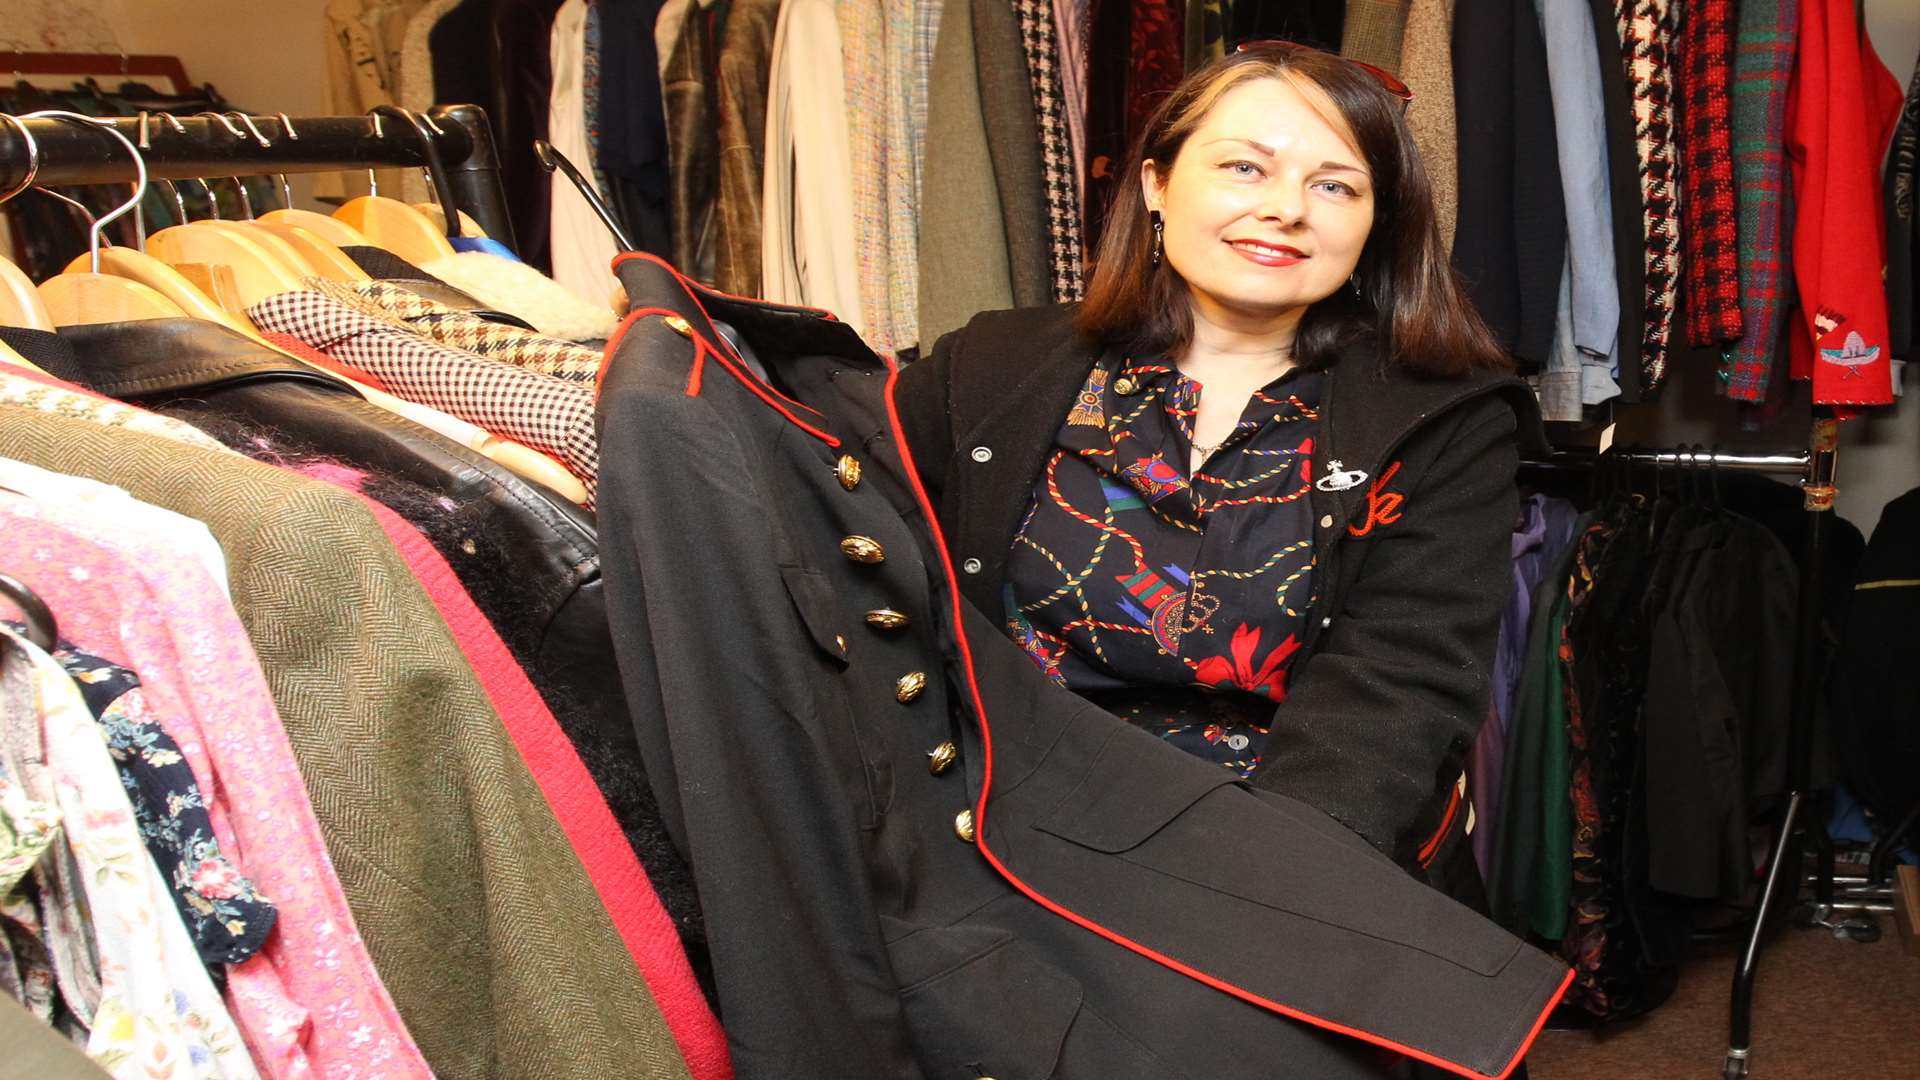 The Buckingham Palace footman bought a military jacket from Kerry-Ann Maxwell